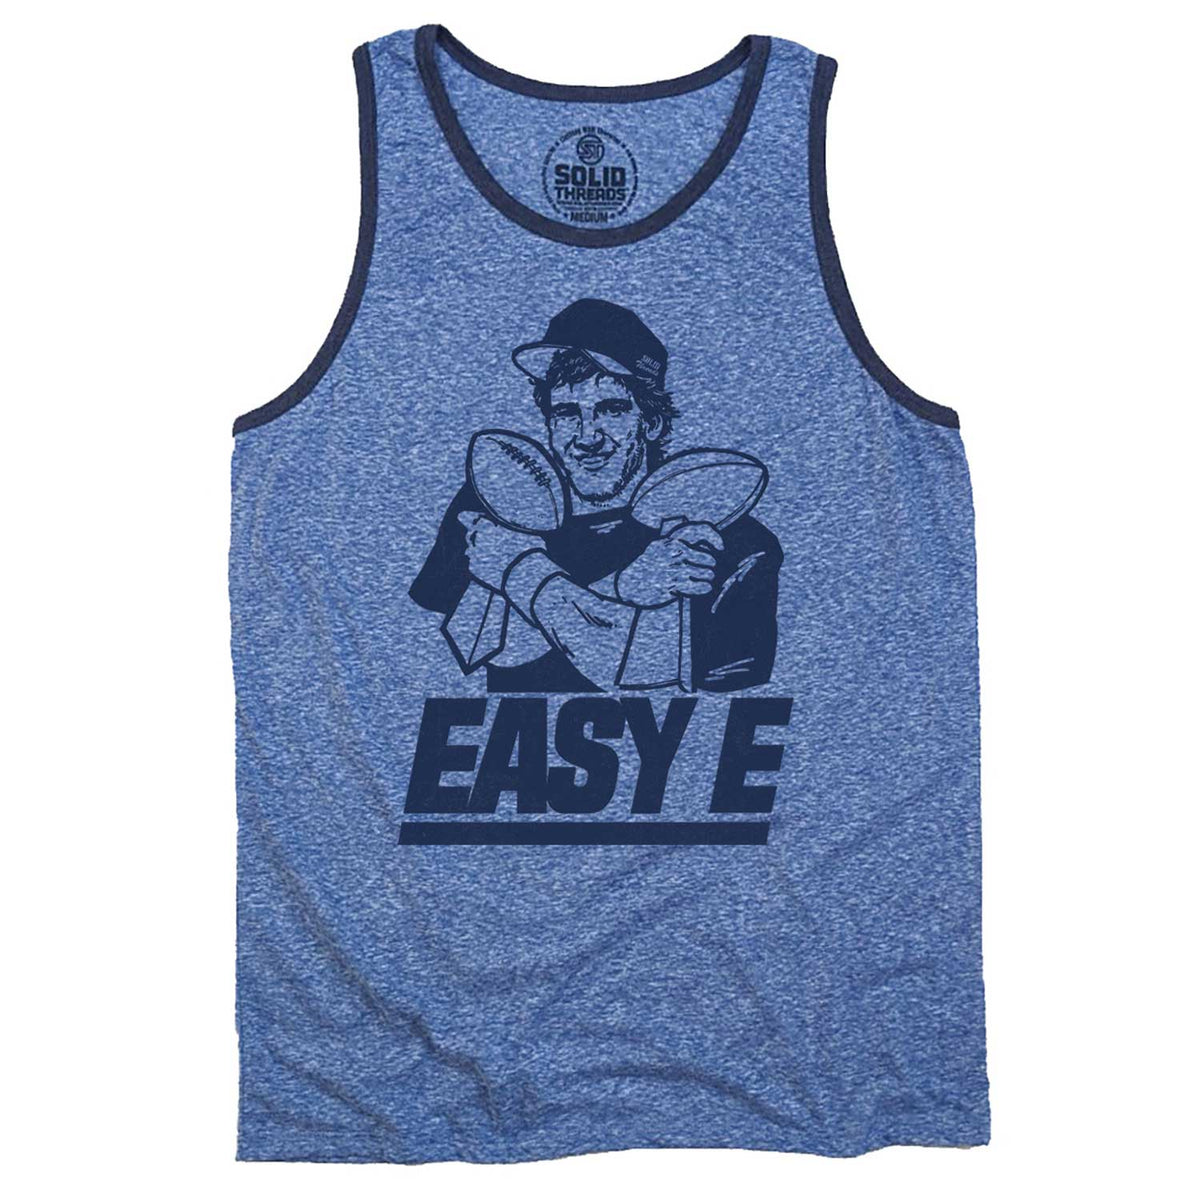 Men&#39;s Easy E Vintage Graphic Tank Top | Cool Eli Manning T-shirt | Solid Threads